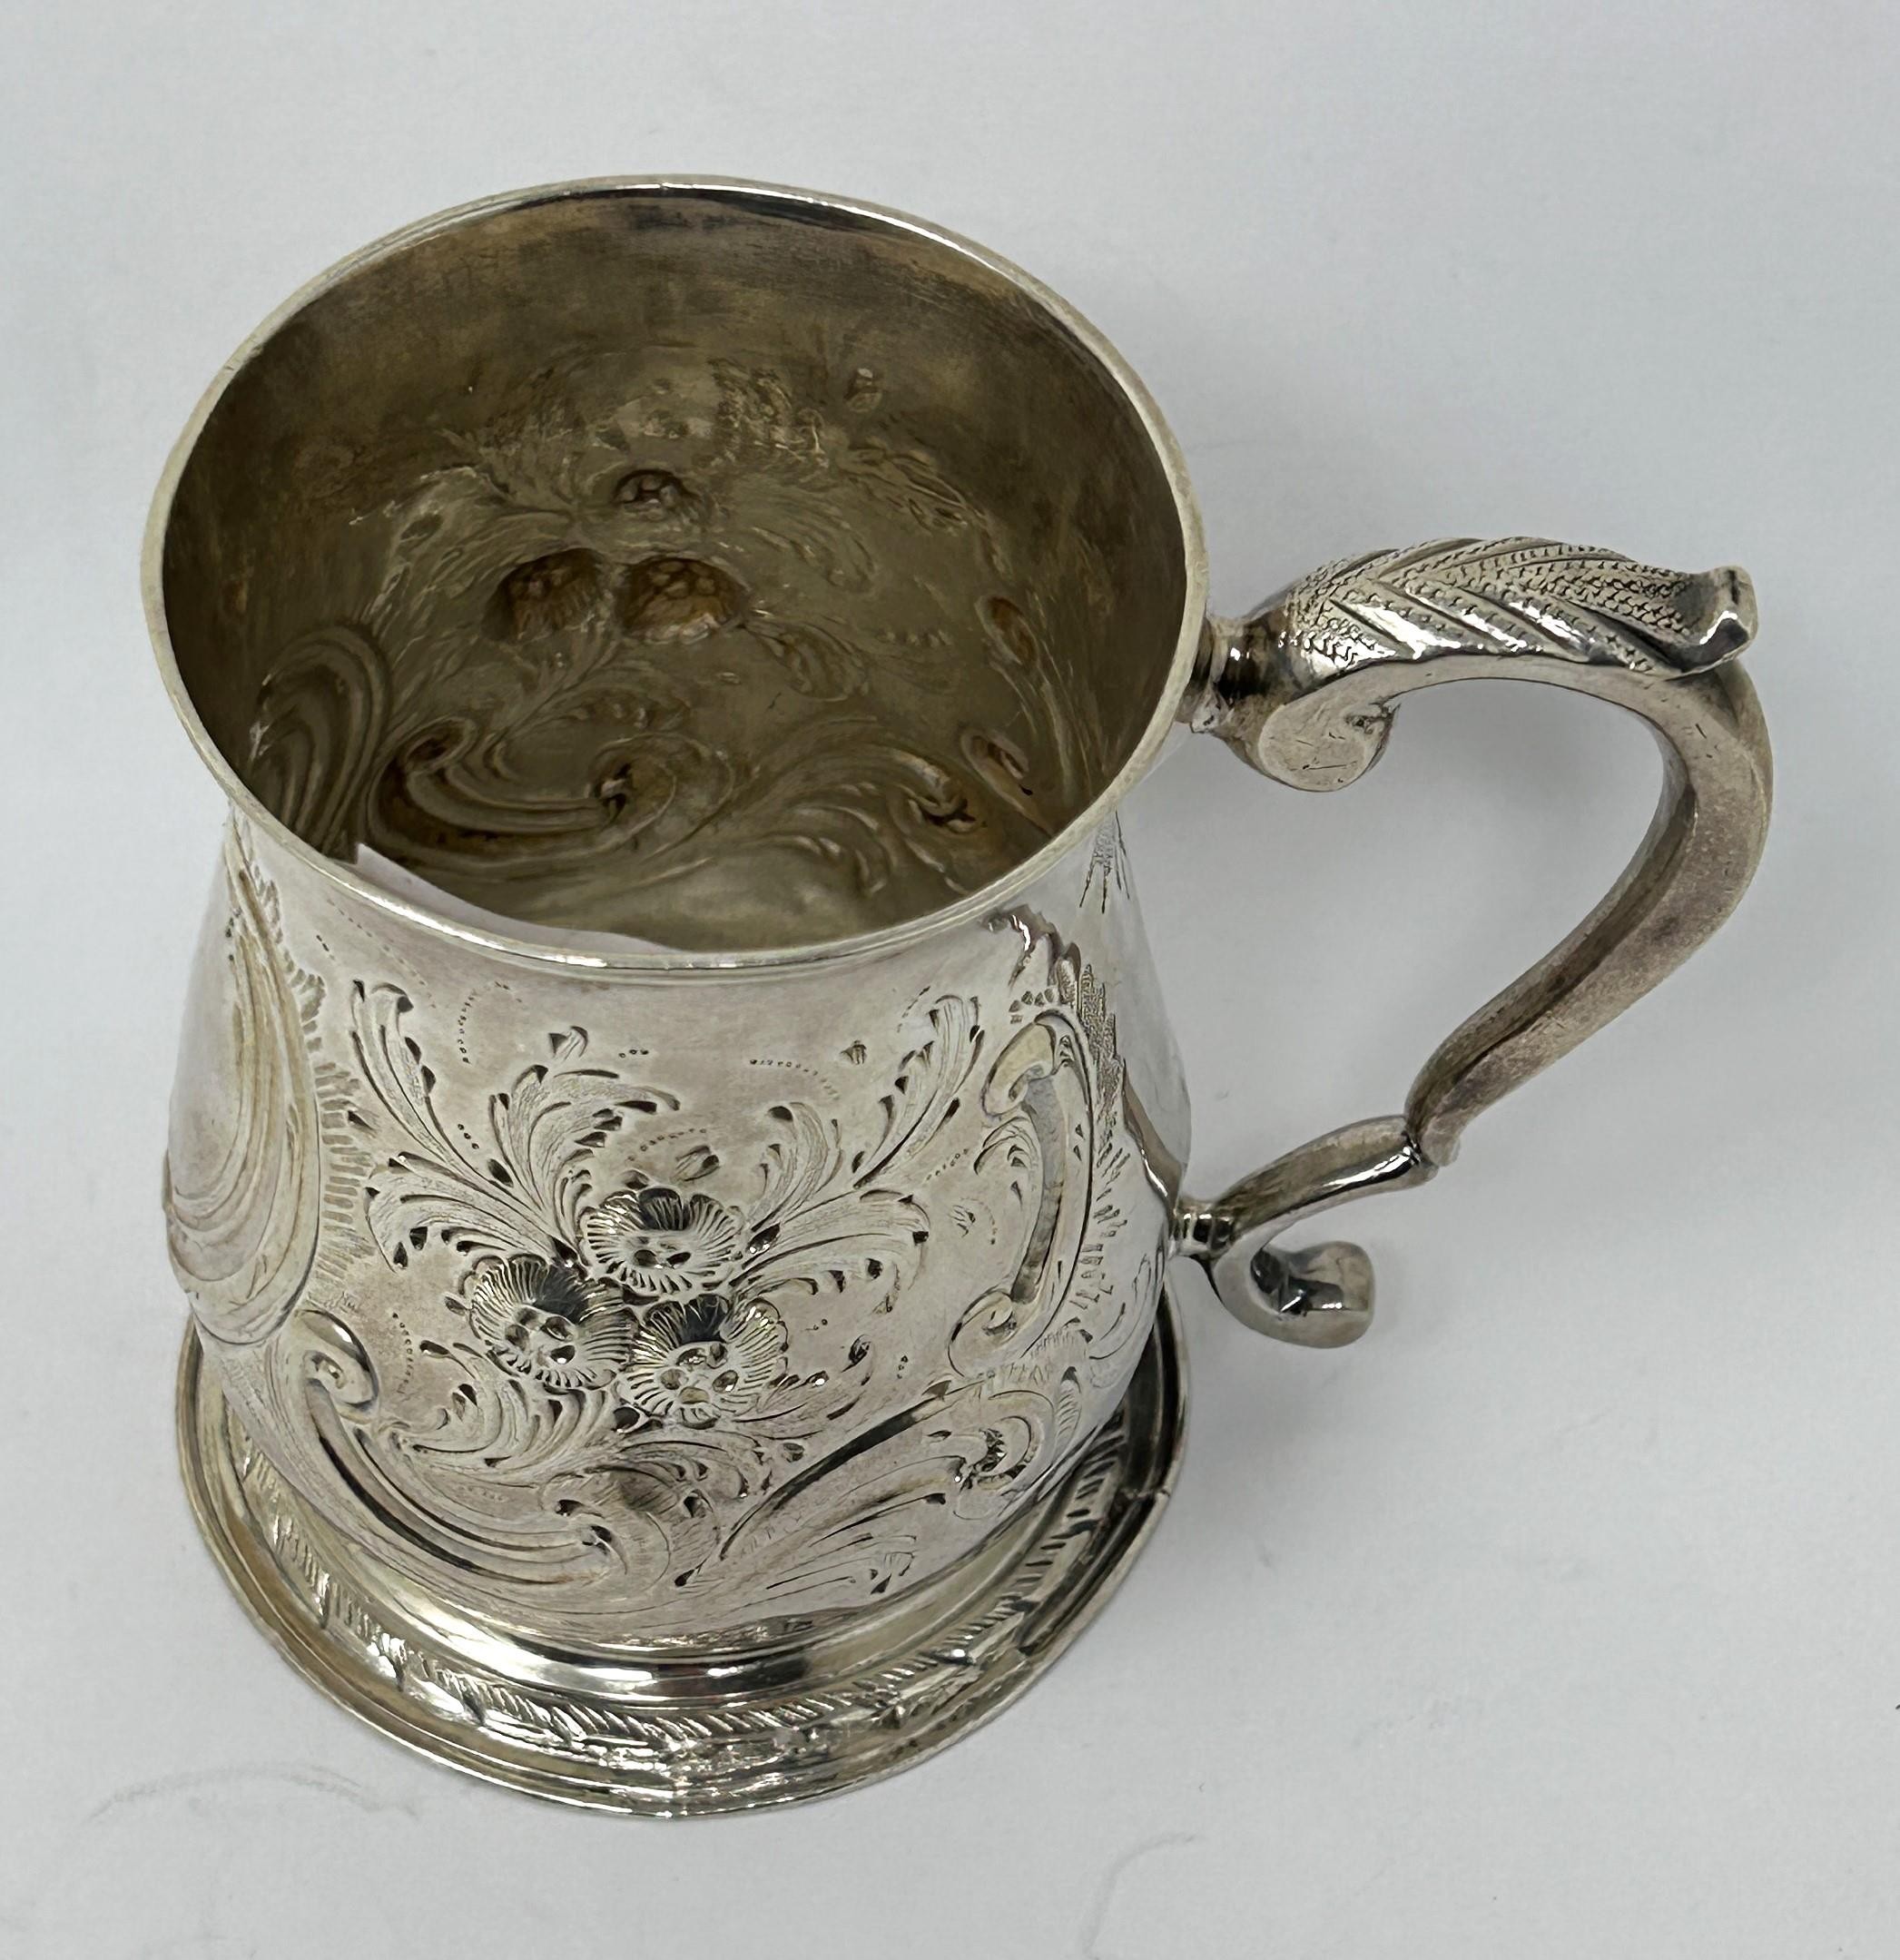 A George III silver mug, marks rubbed, later decorated, 5.1 ozt - Image 4 of 6